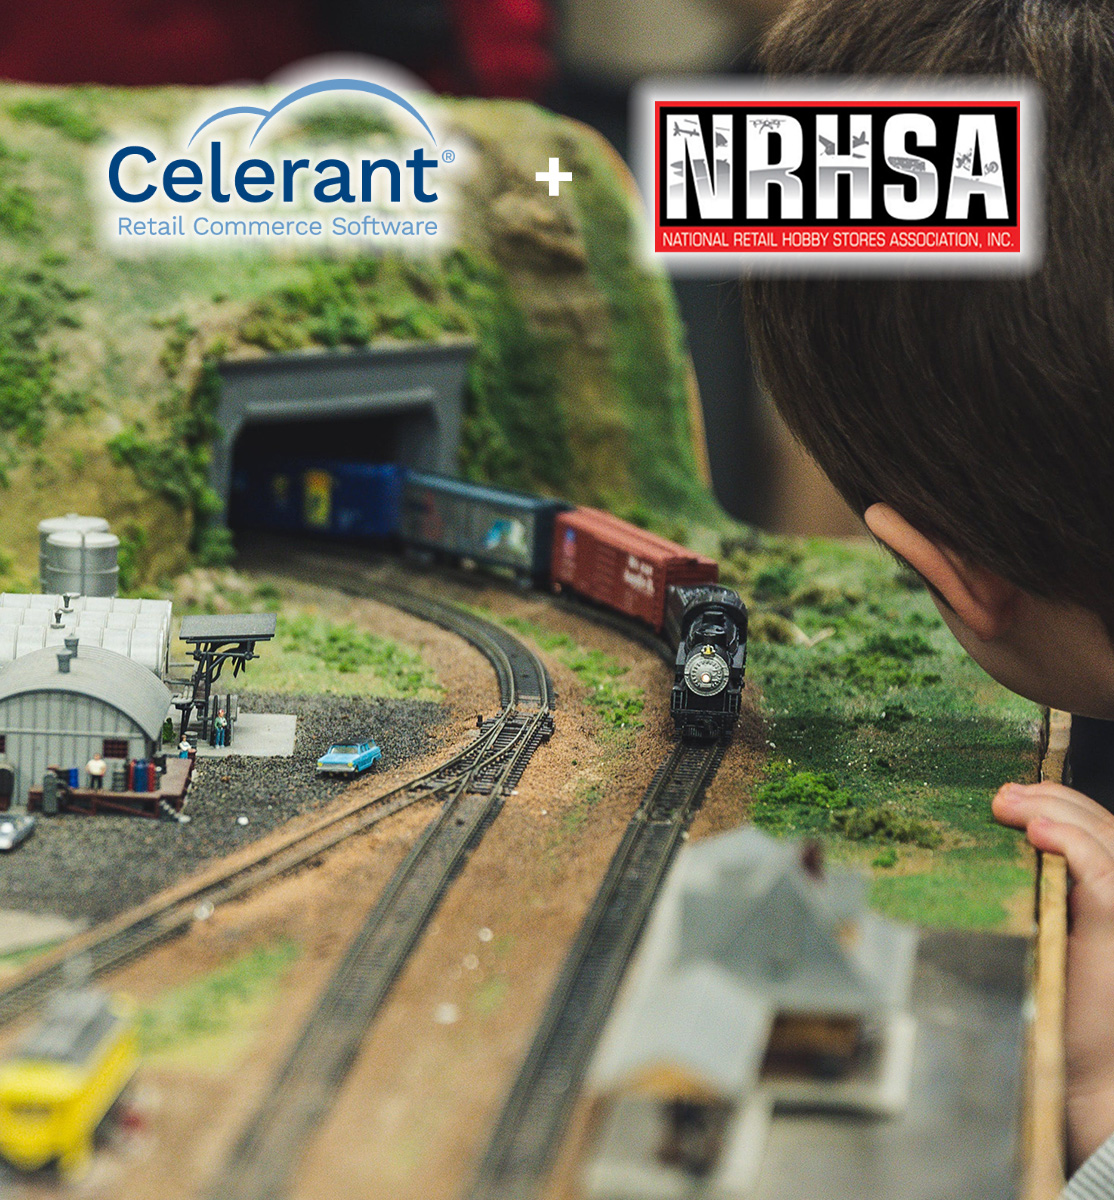 Celerant and the NRHSA over a model train set